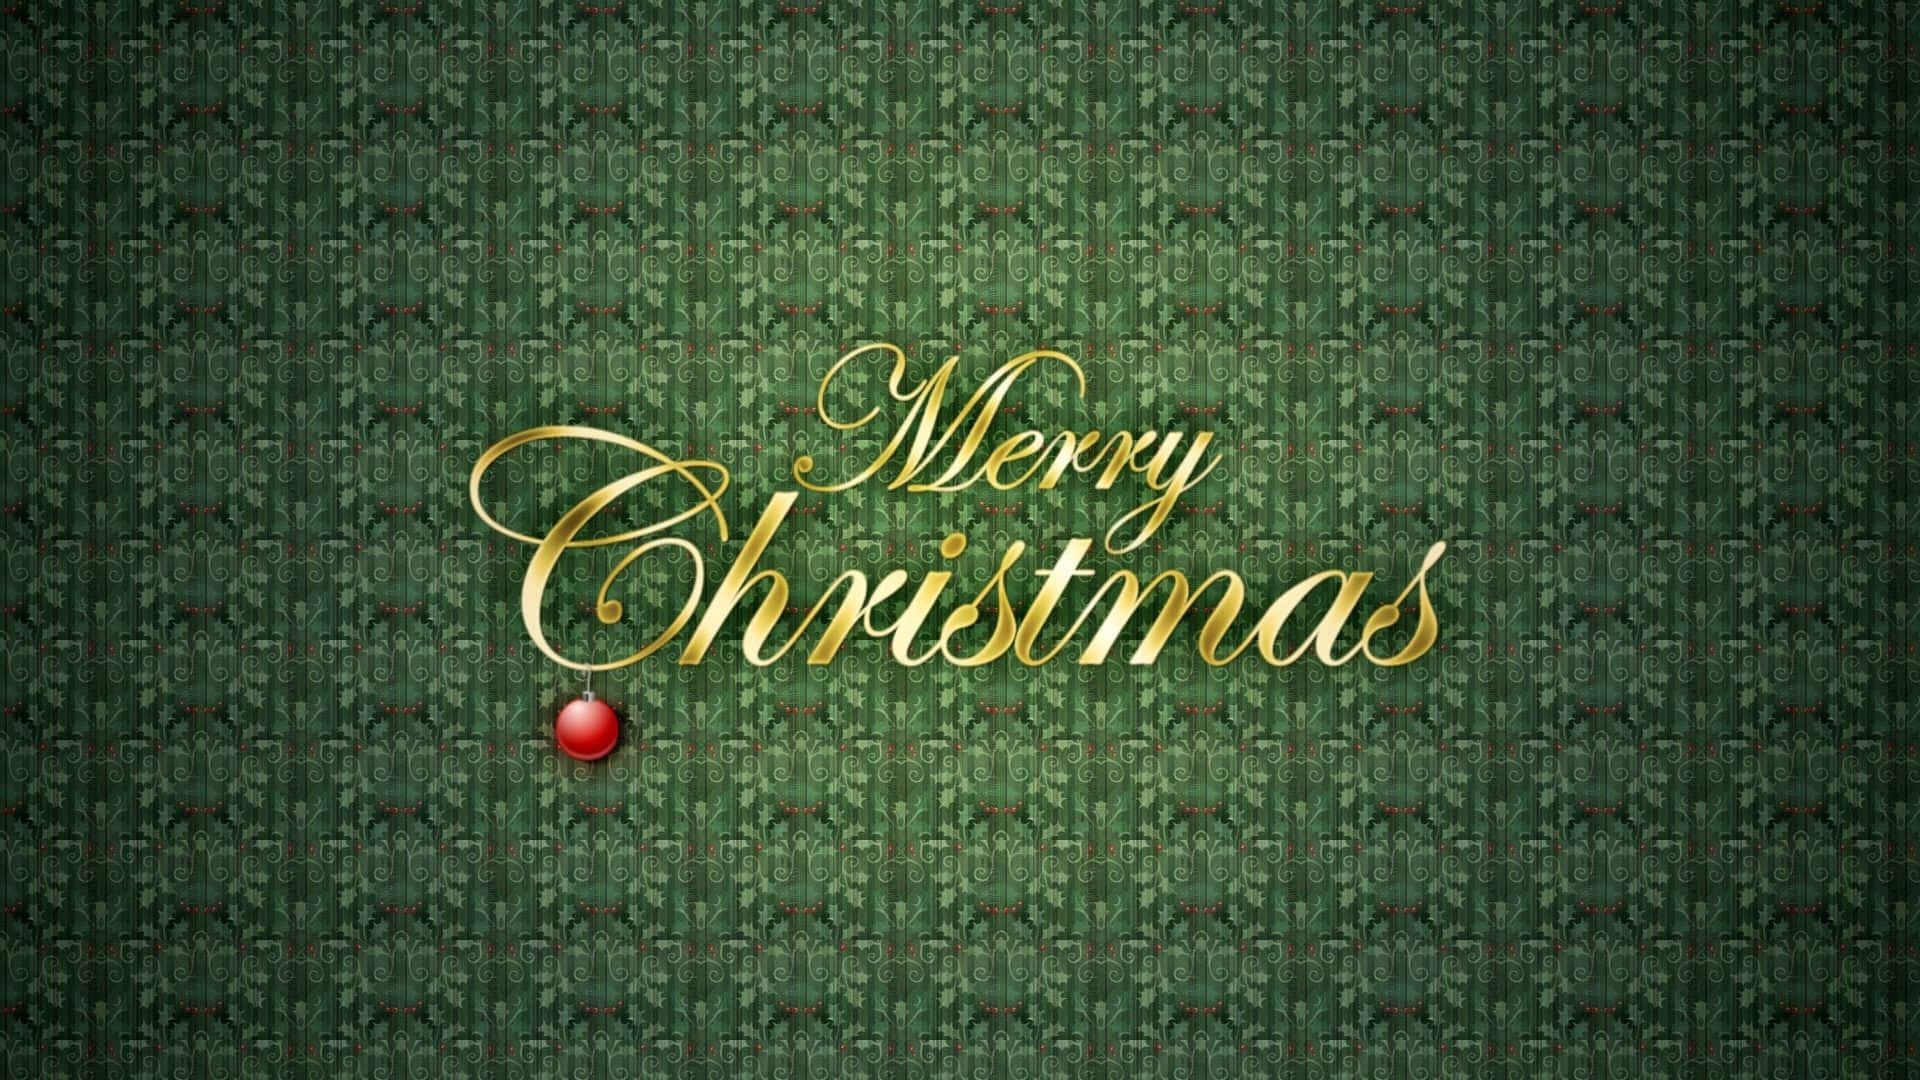 Merry Christmas Background With Gold Lettering Wallpaper